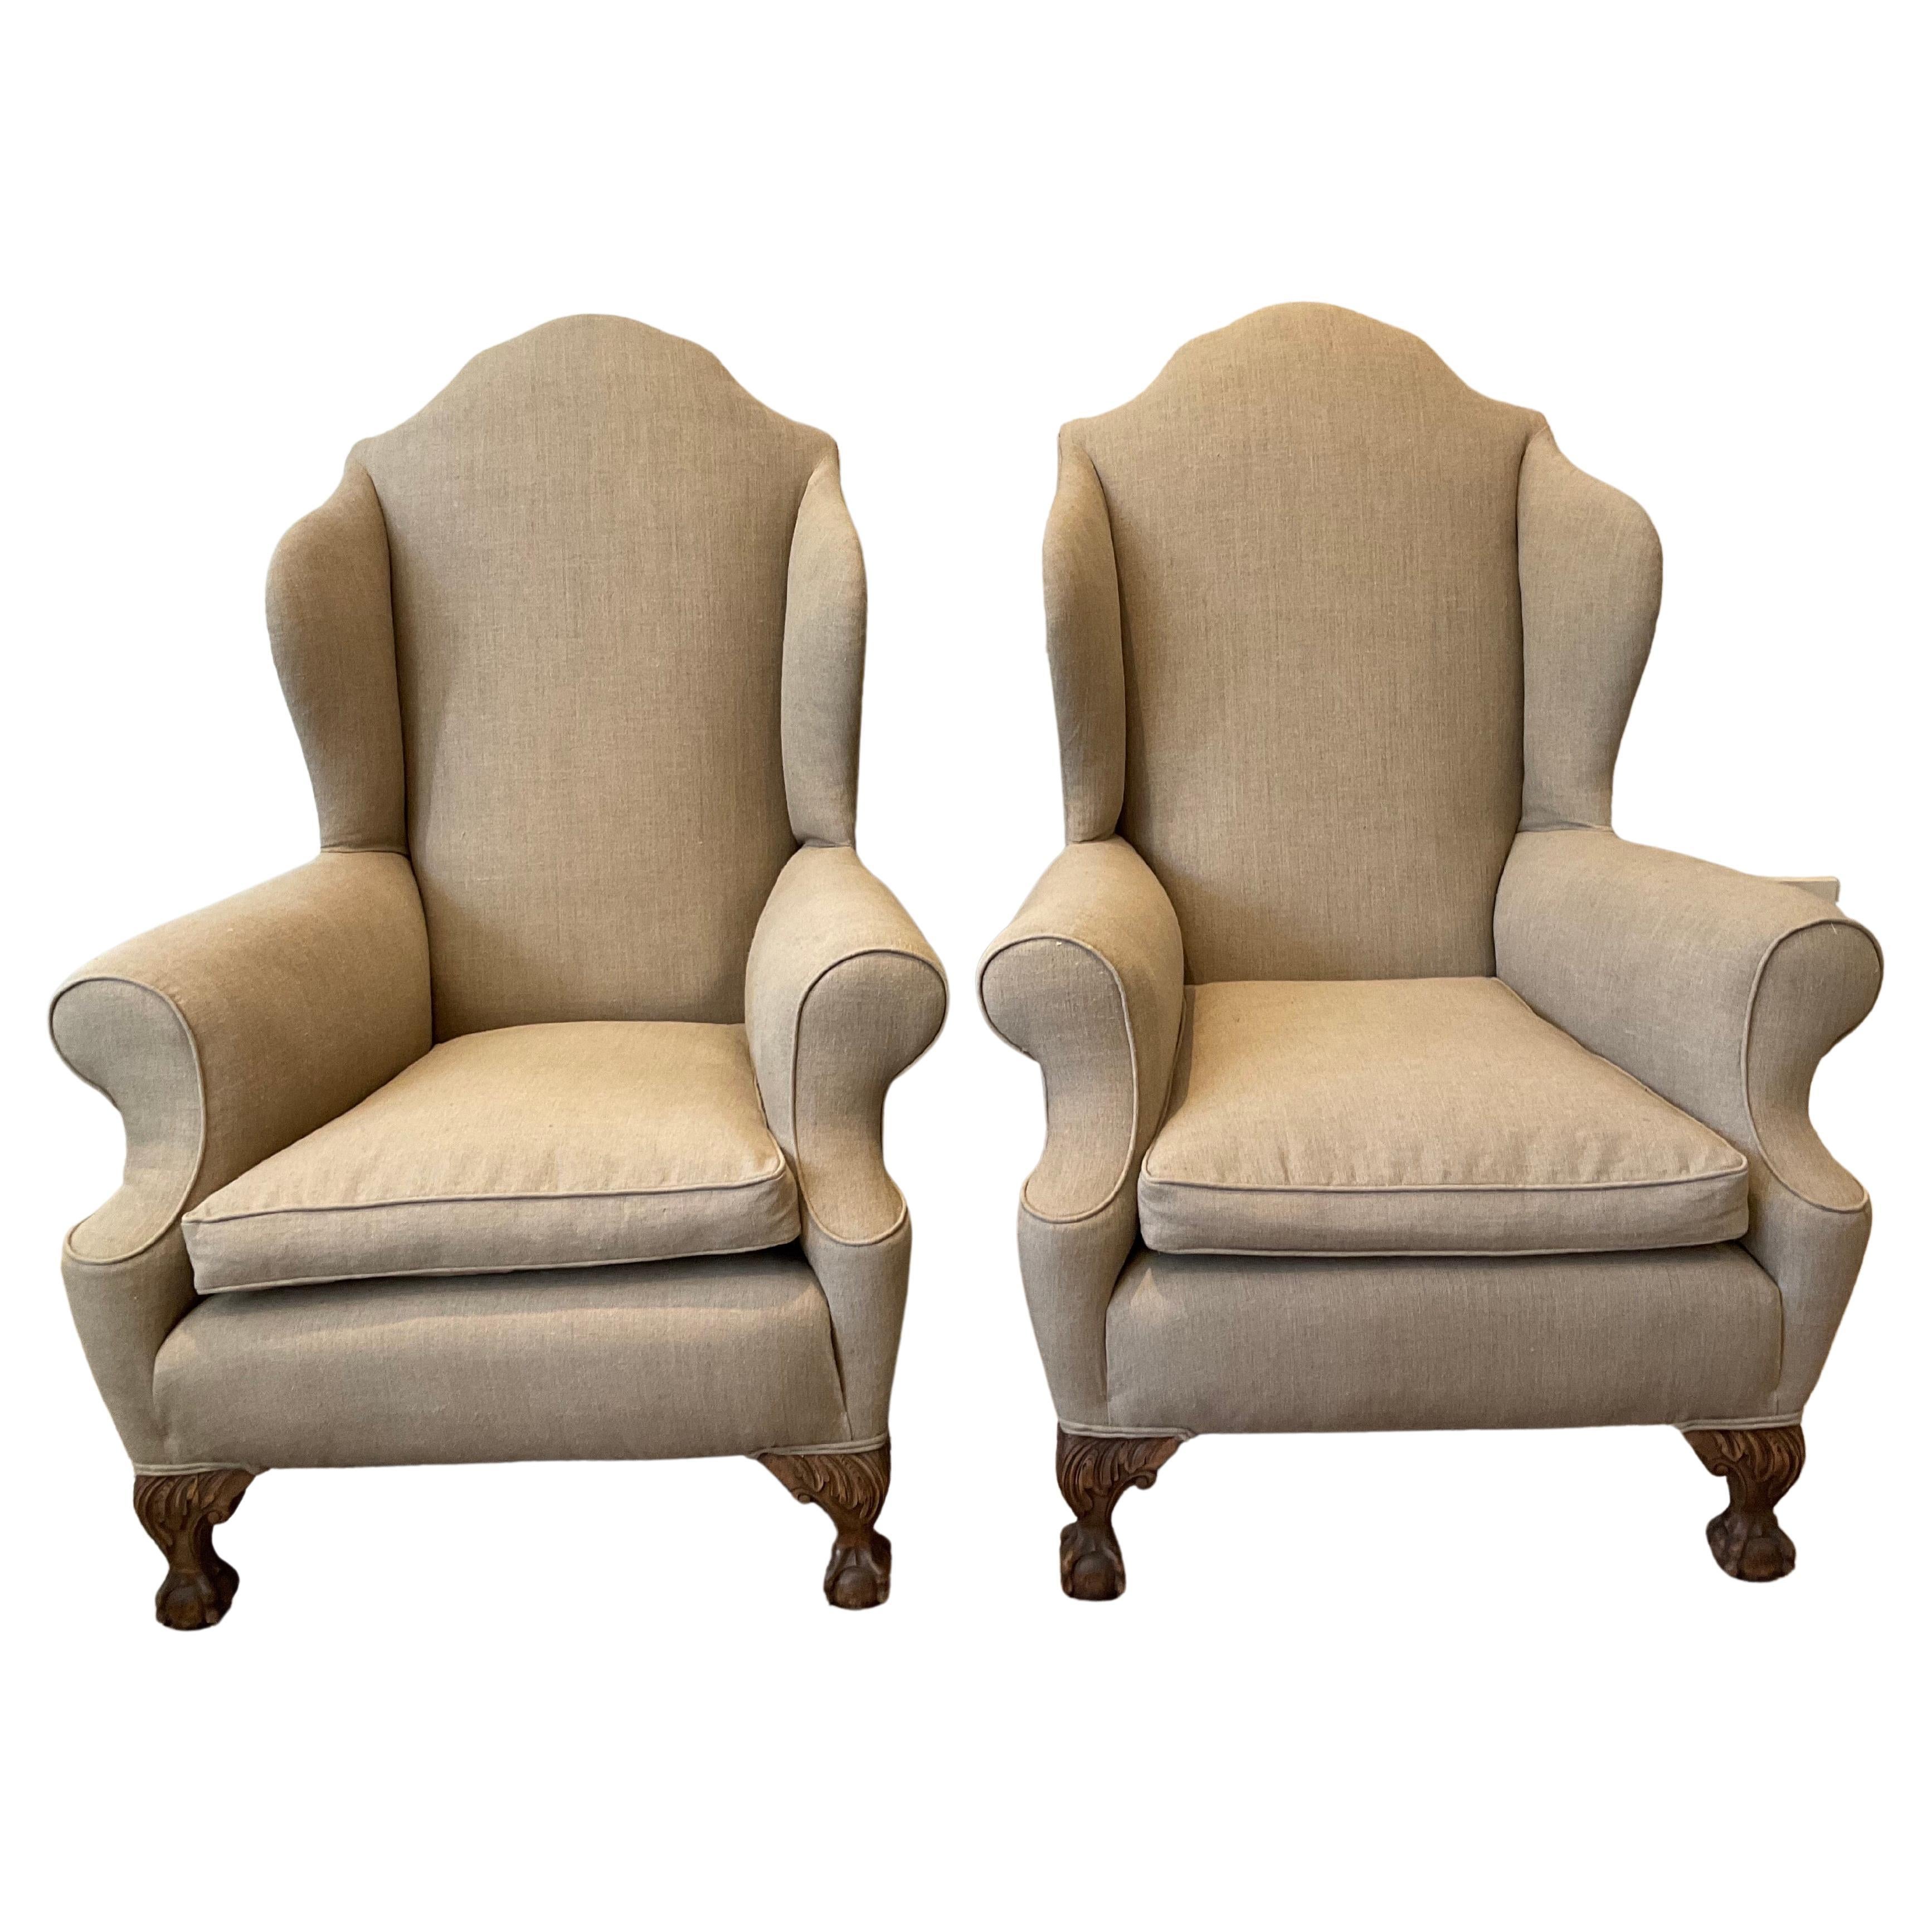 Pair of Large 1920s English Wing Back Chairs Upholstered in Neutral Linen